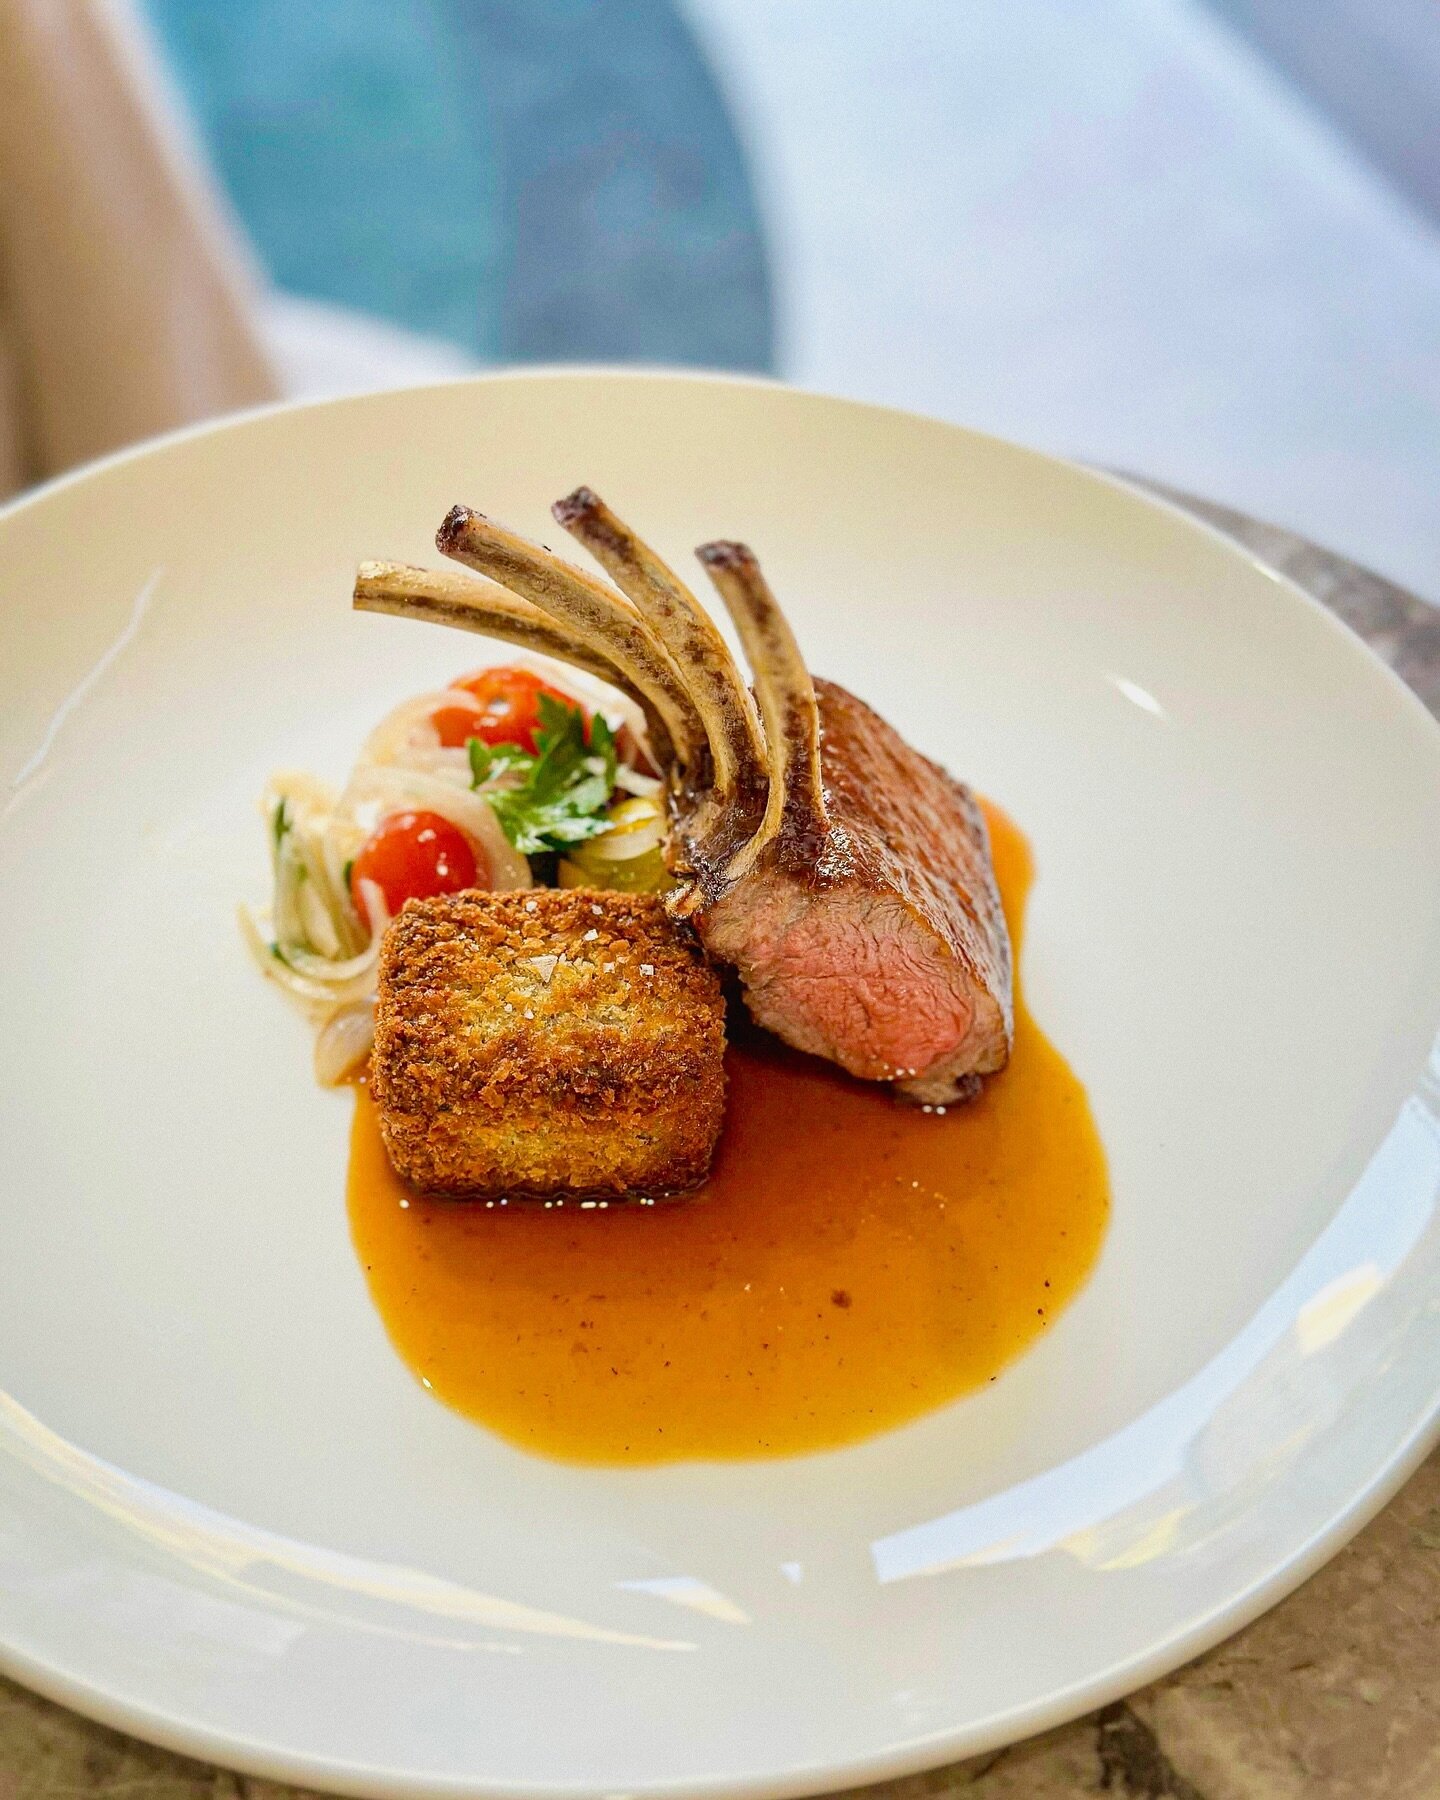 Lamb rack, pressed lamb shoulder croquette, mixed cherry tomato melodies, pickled onions, lamb jus #mapasion #foodartlove #mlebournechef #privatechef #privatedining #melbournefoodie #chefstalk #chefsofinstagram #chefstable #dinein #homecook #foodstag